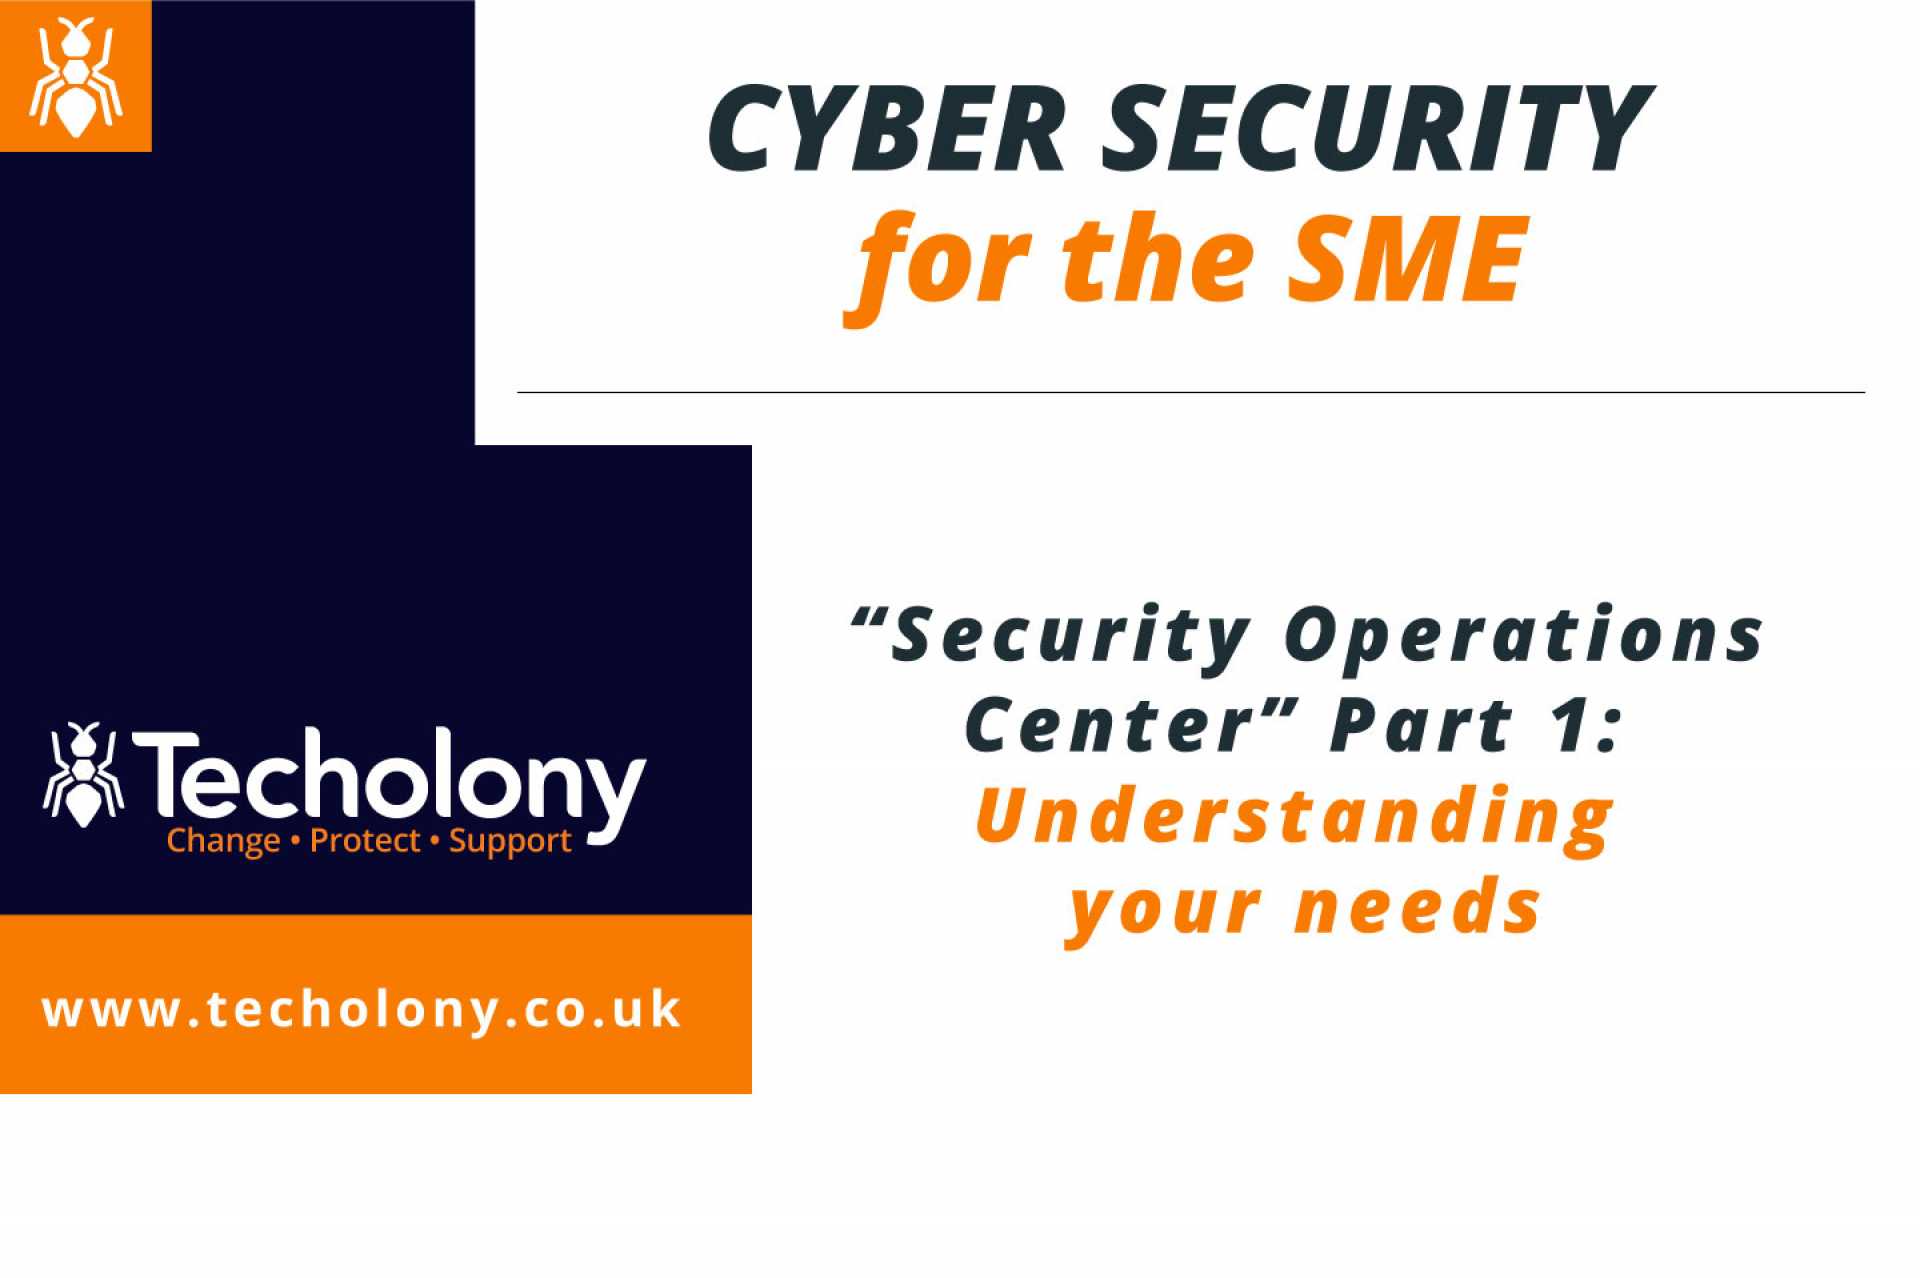 Cyber Security for Small to Medium Enterprises